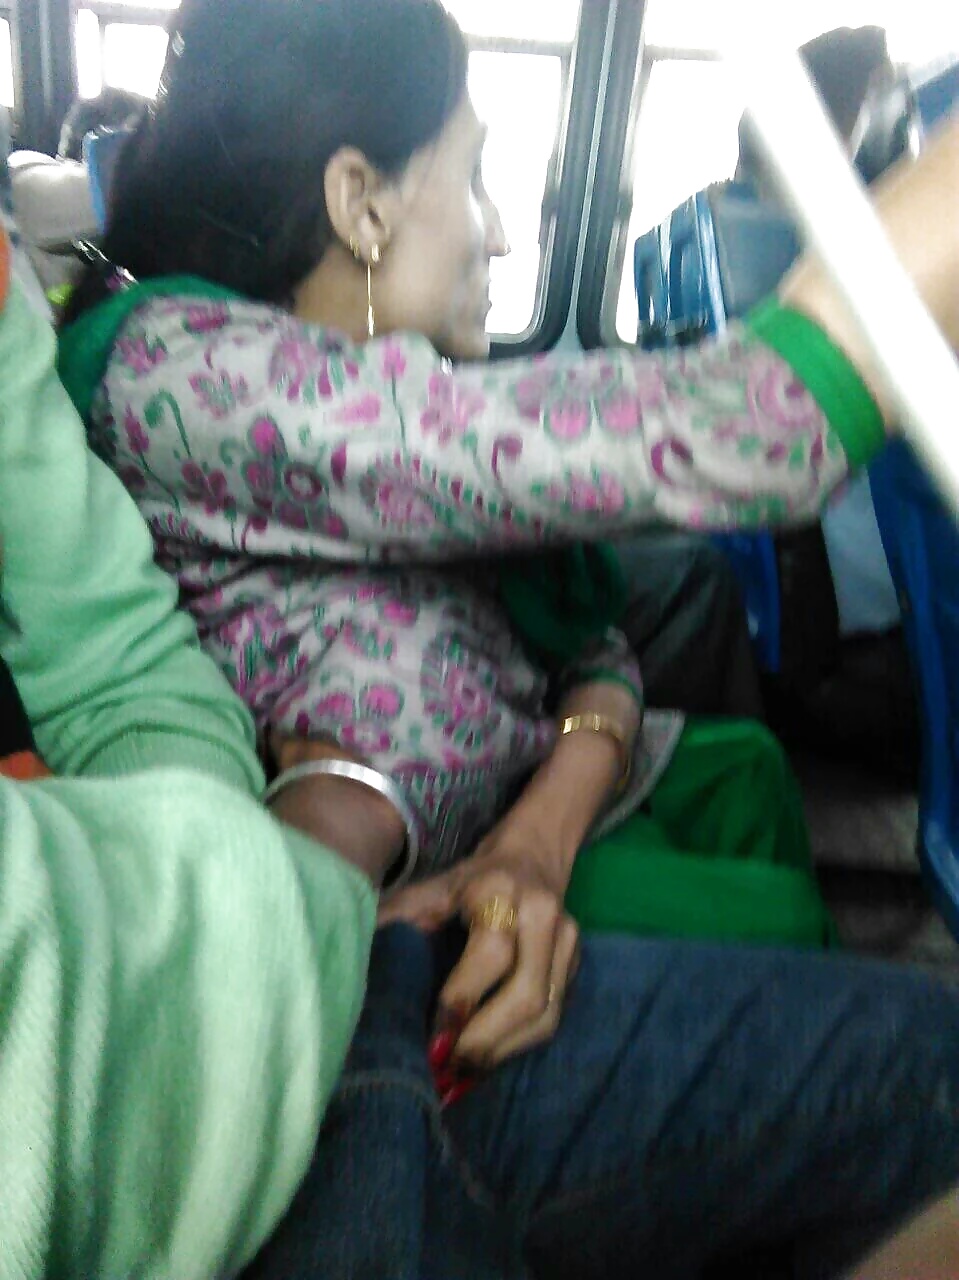 Granny want to touch dick on train